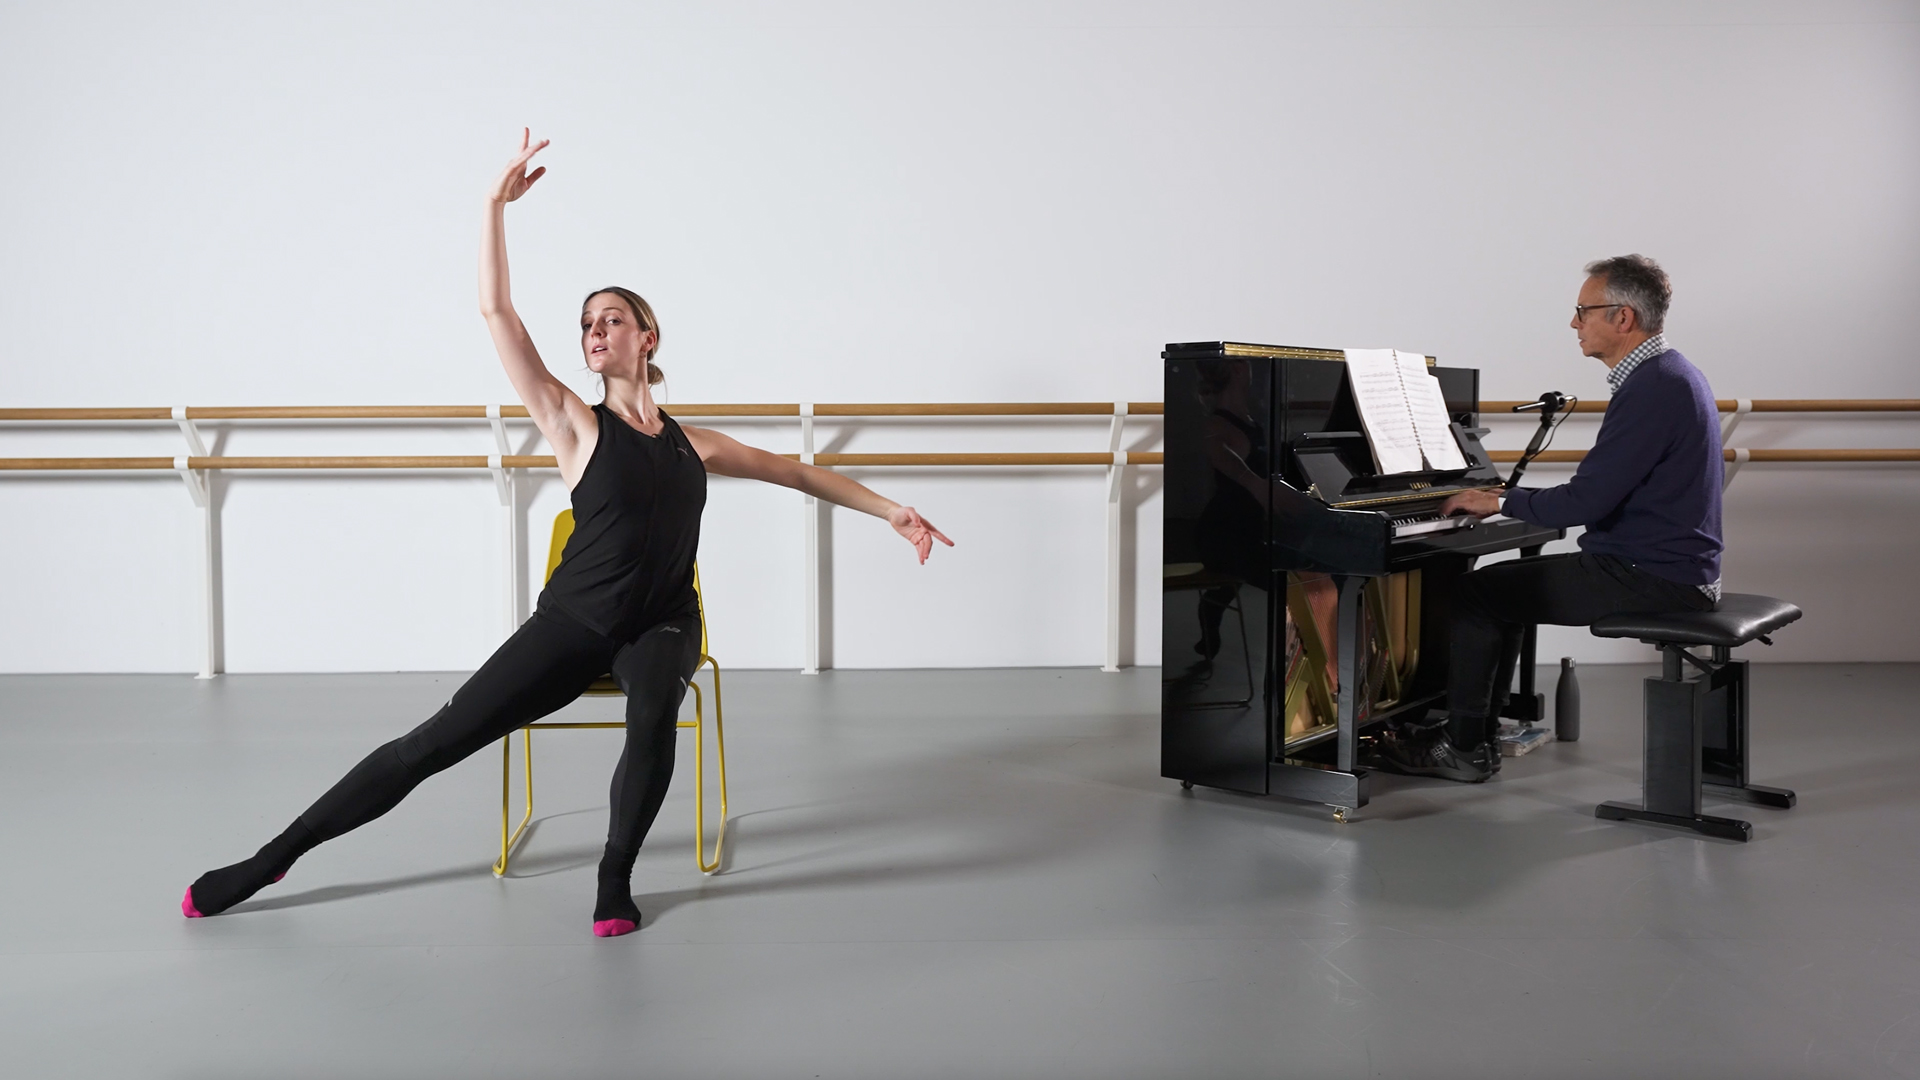 A dance tutor does a port de bras while sitting on a chair. A pianist is in the background.